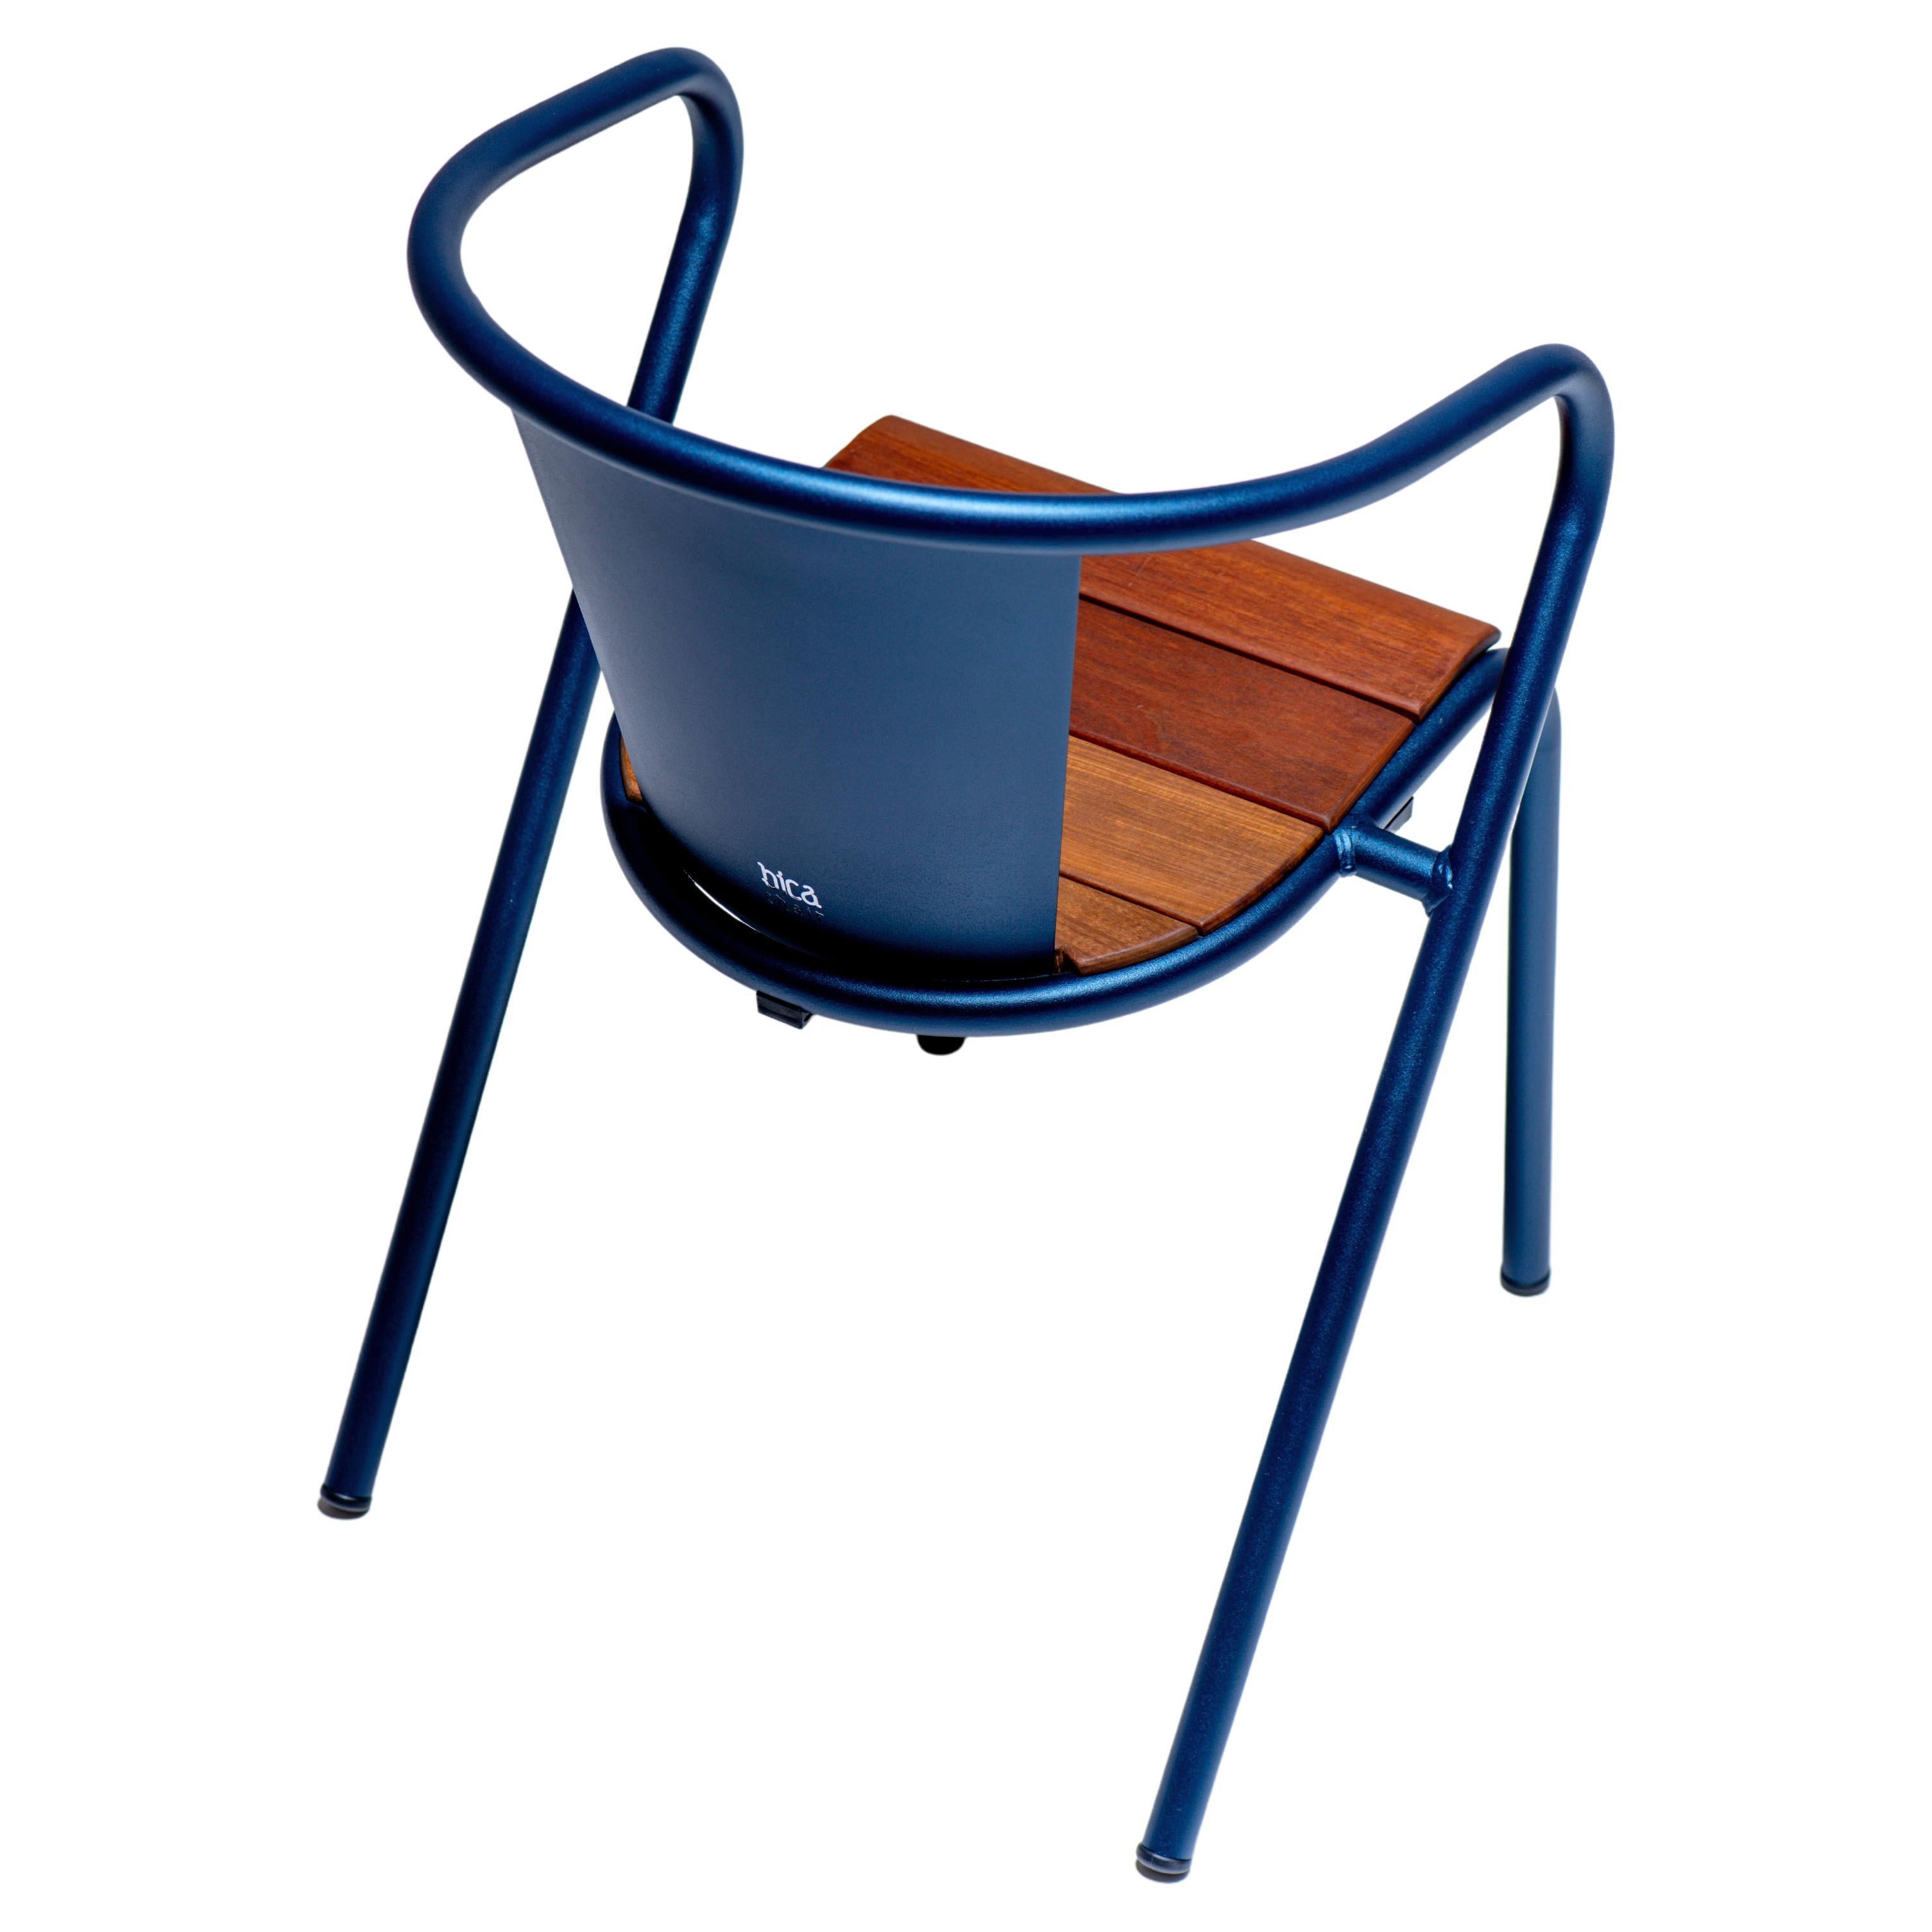 Redesign of the iconic 1950’s Portuguese Chair by Alexandre Caldas - Ipê wood For Sale